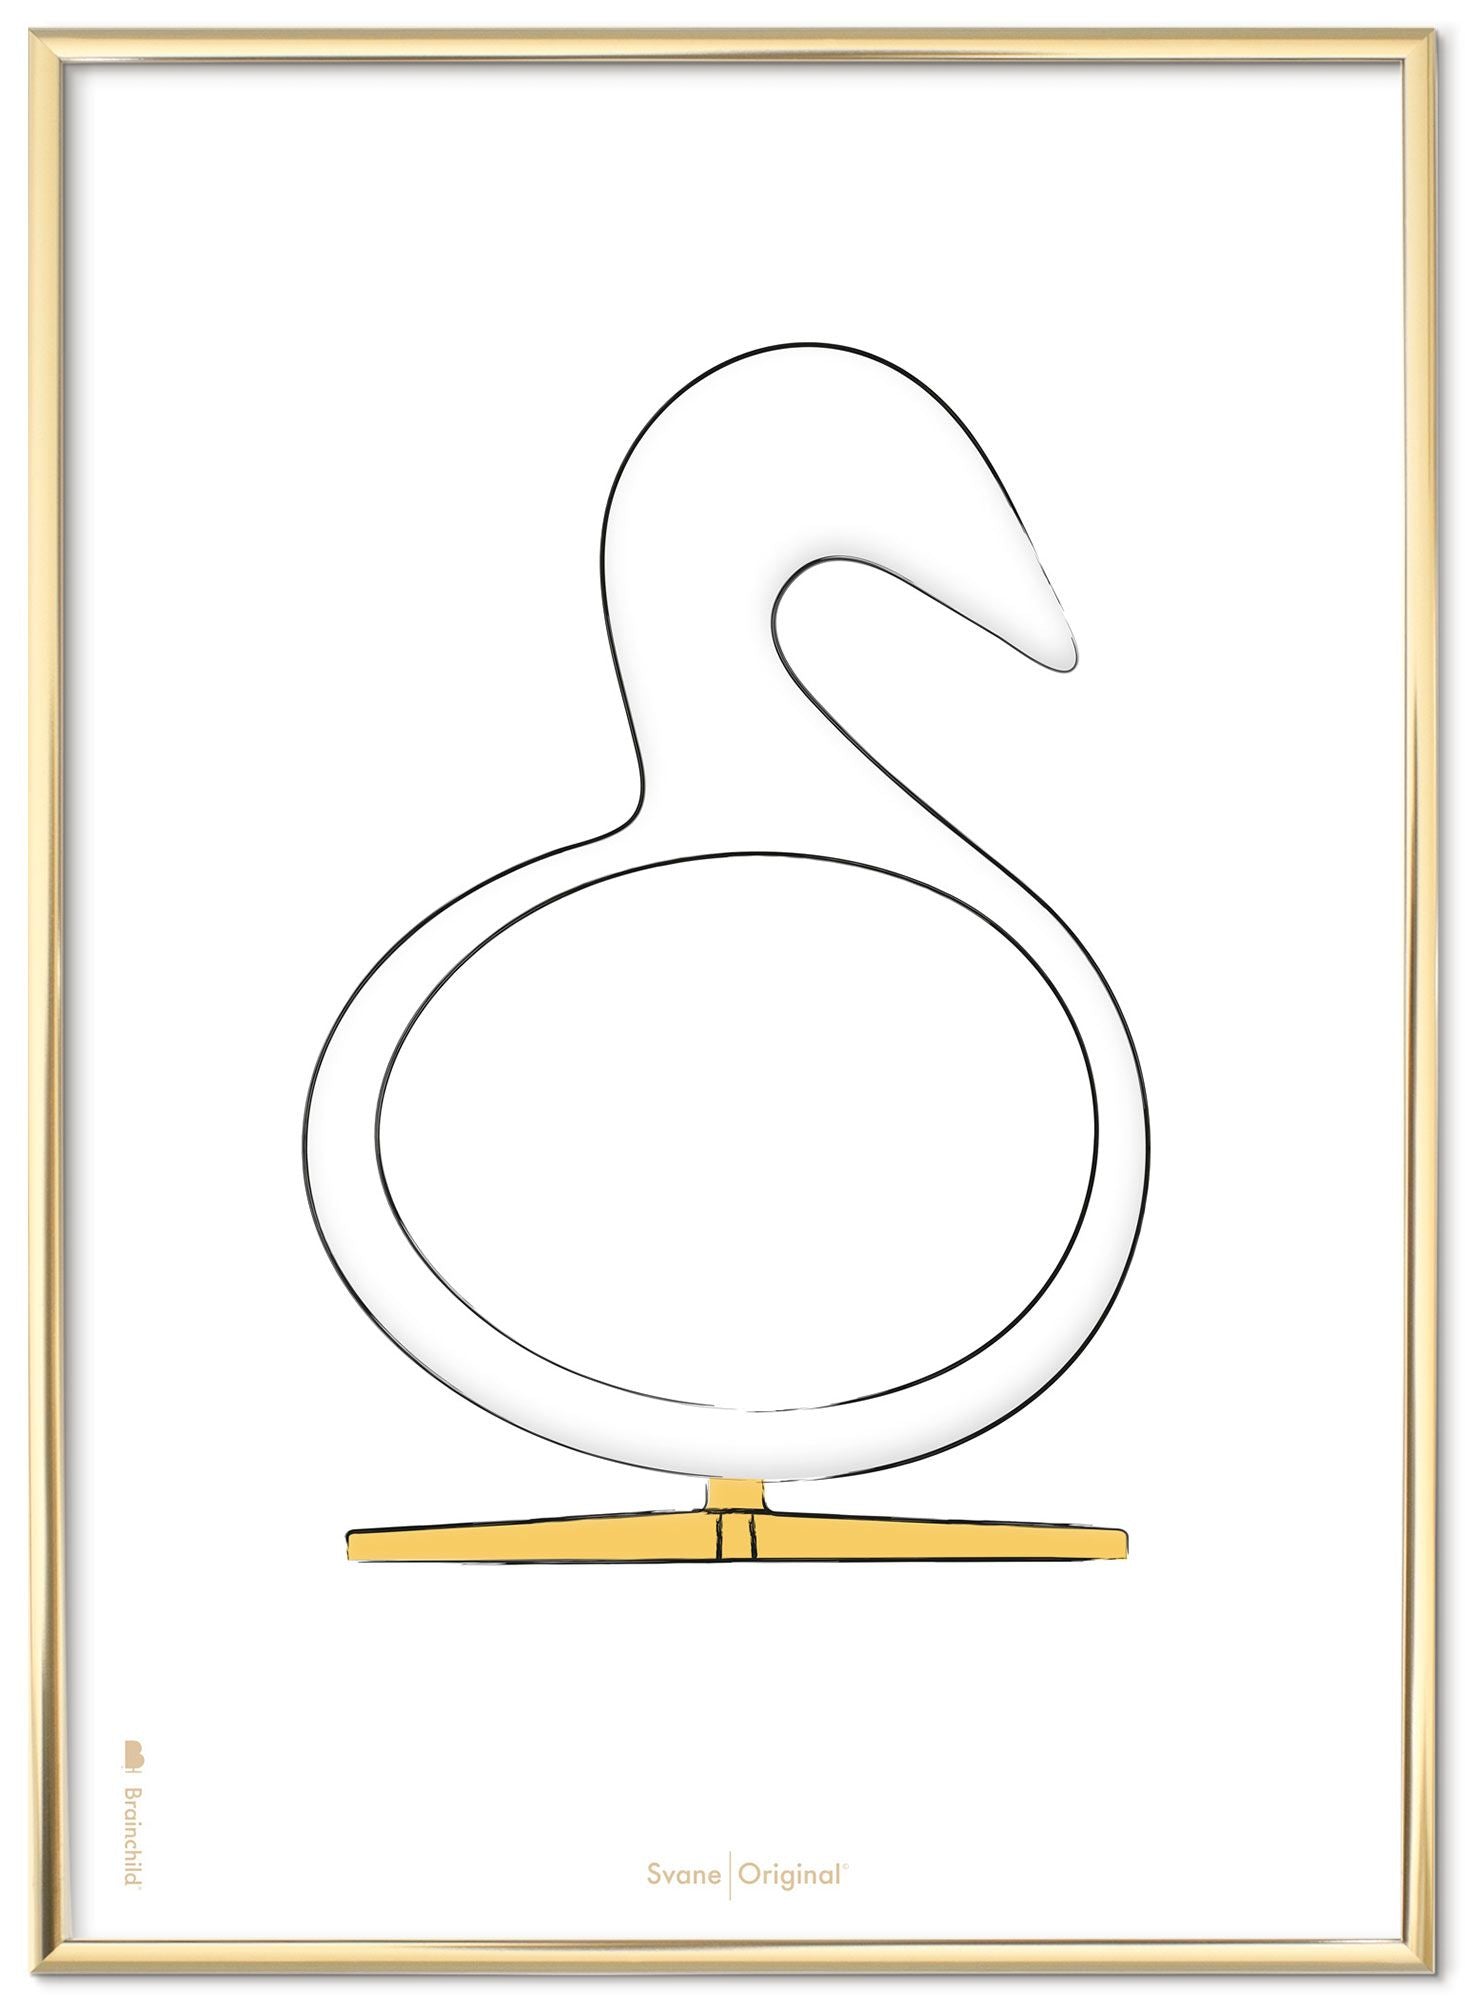 Brainchild Swan Design Sketch Poster Frame Made Of Brass Colored Metal 50x70 Cm, White Background